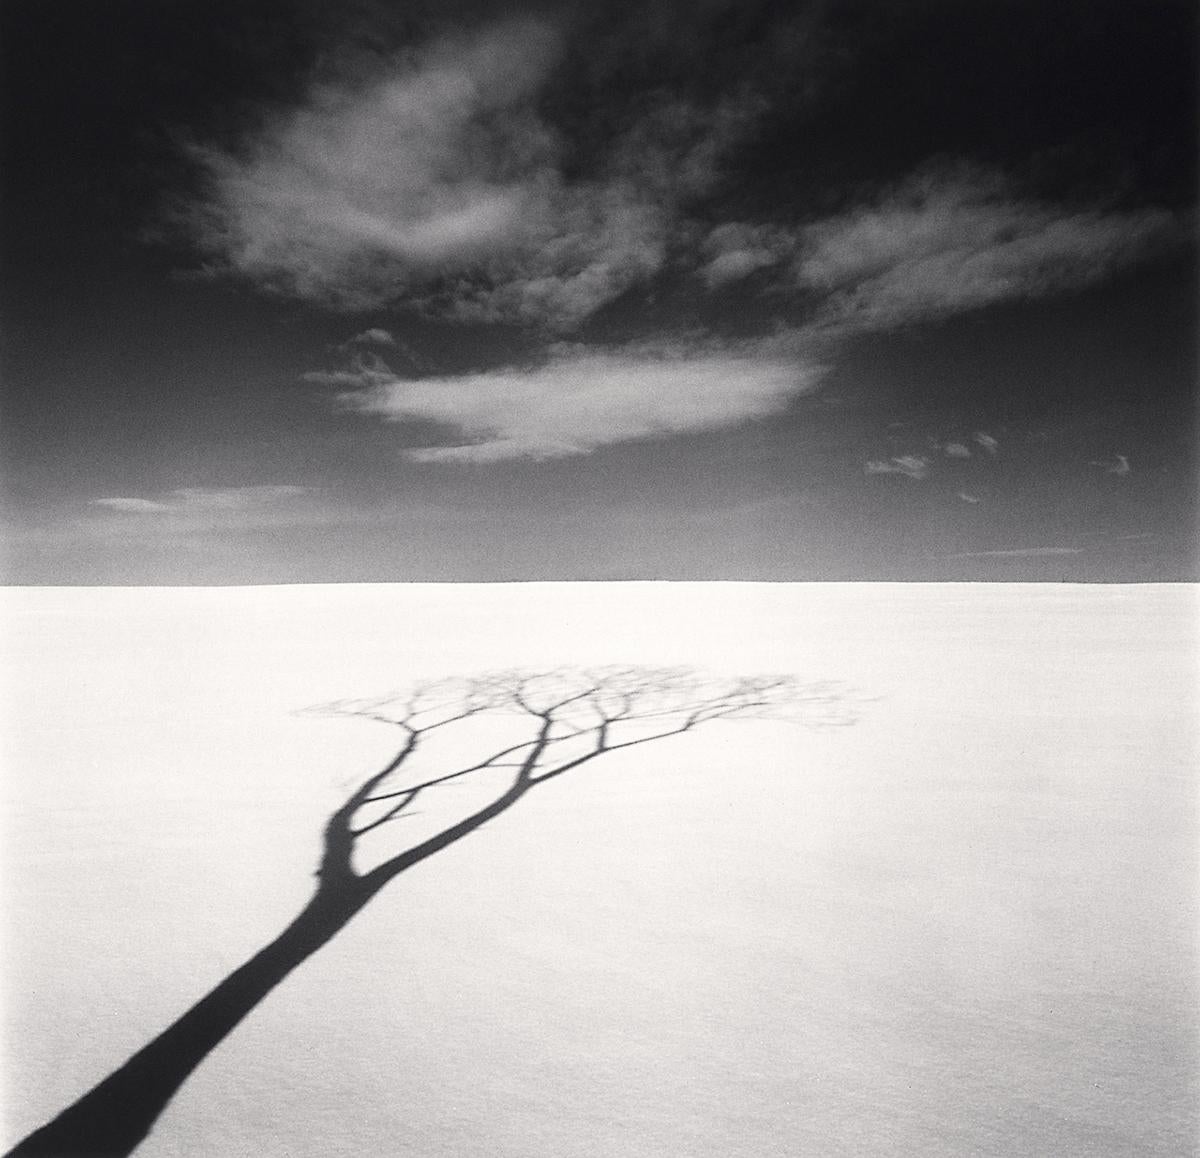 Onishi Tree Shadow and Clouds, Study 1, Hokkaido, Japan by Michael Kenna is a 8 x 8 inch* silver gelatin print, available in an edition of 25.
*Please note: the measurements of this print are approximated
This photograph is signed, titled, negative